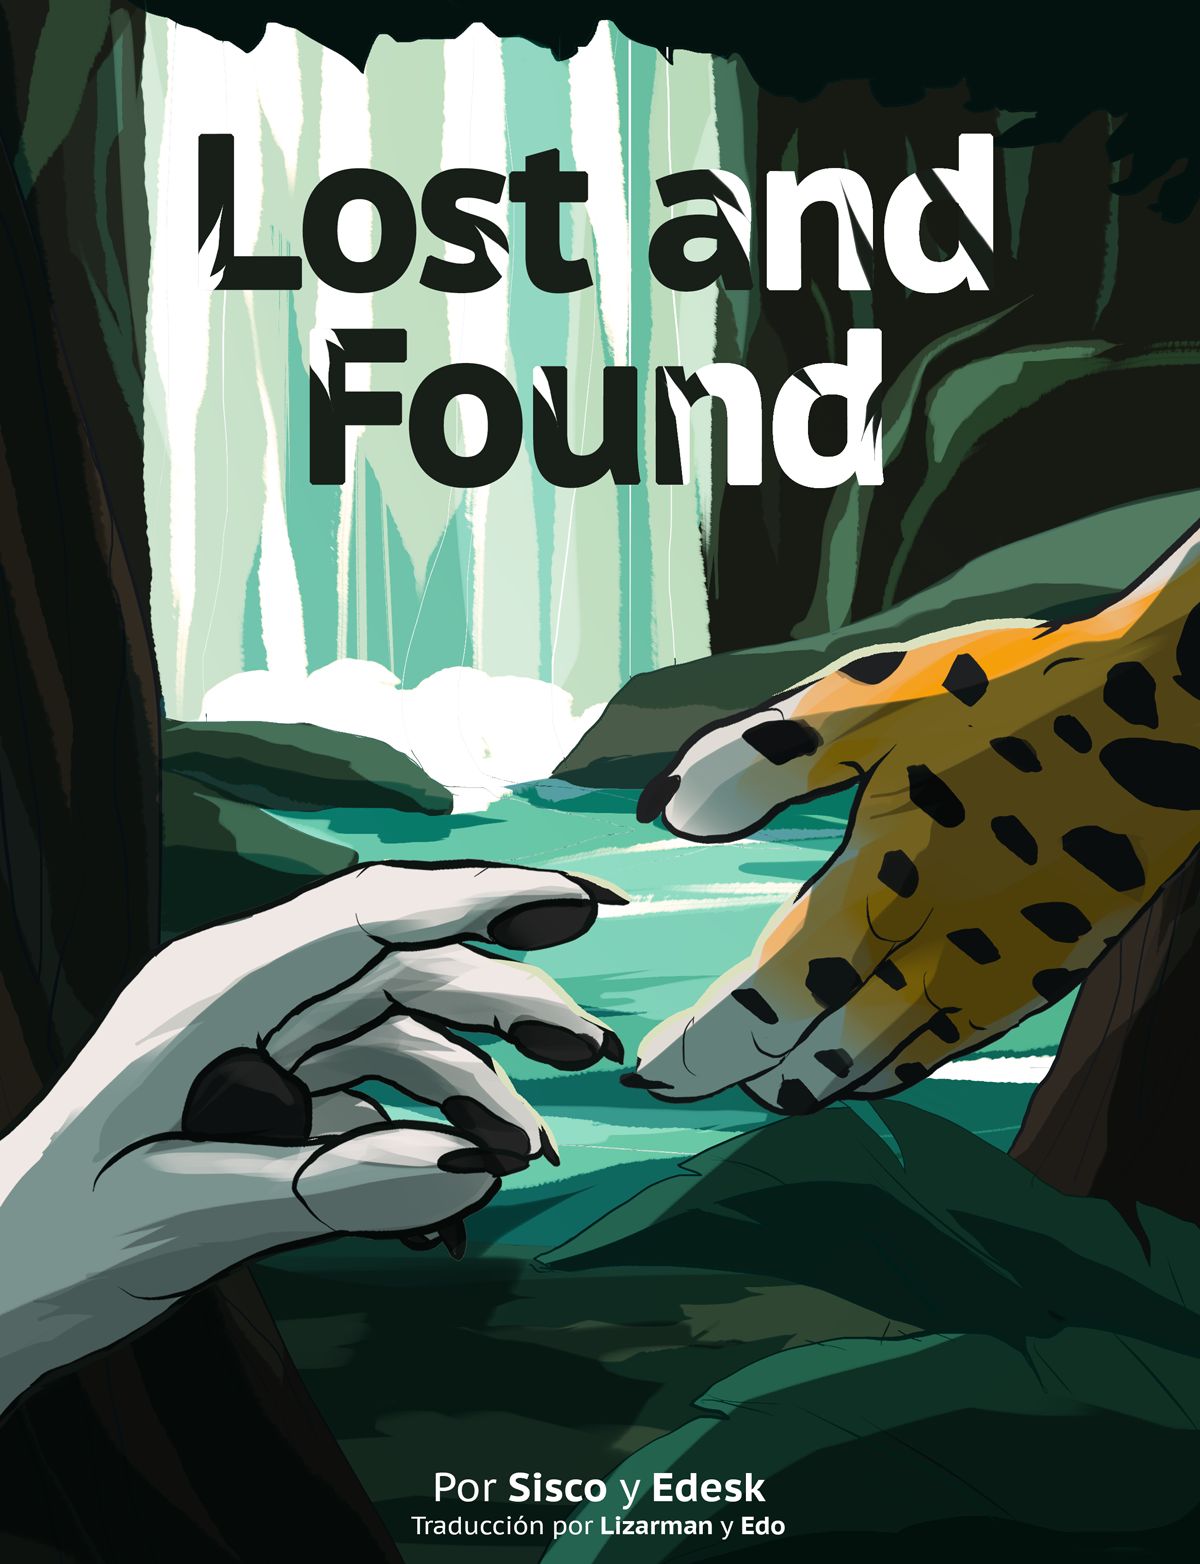 Lost and found porn